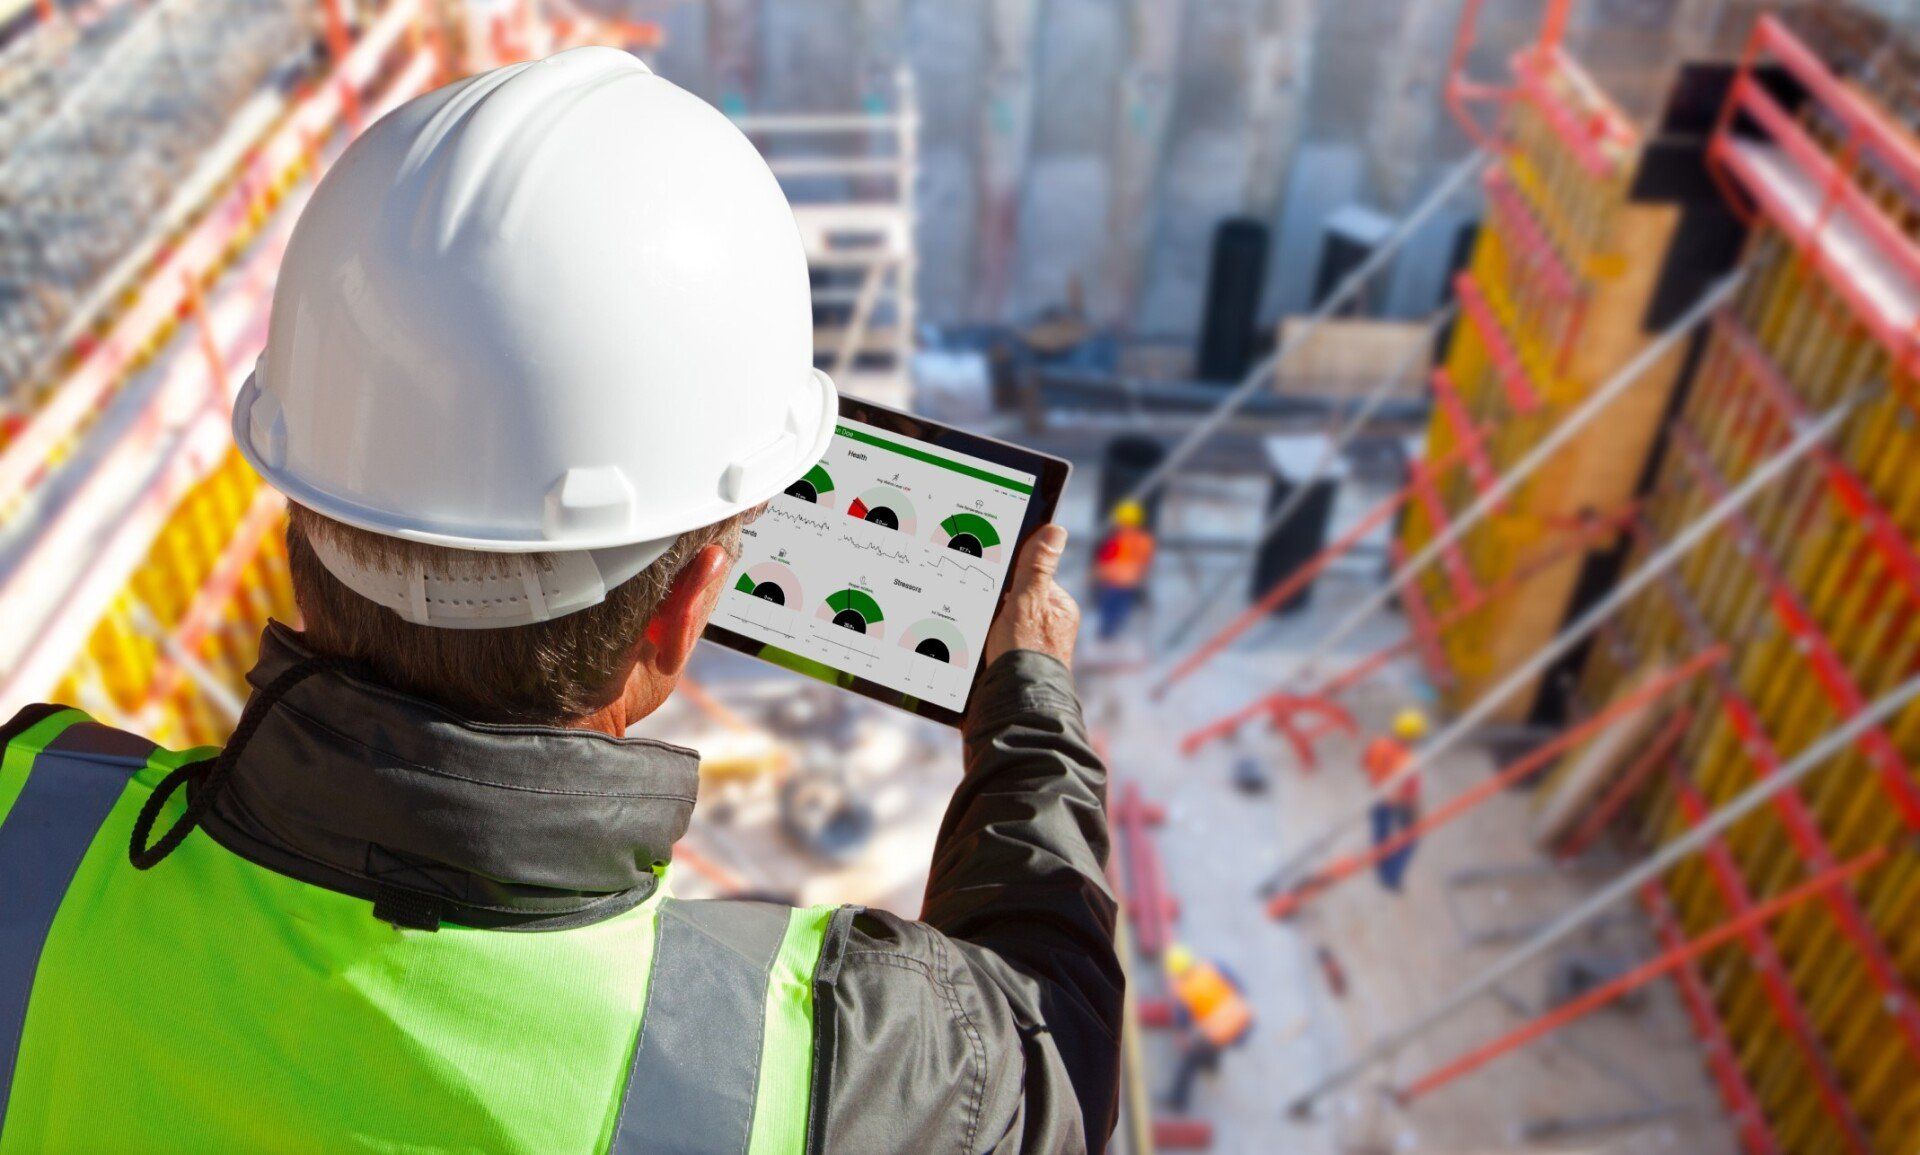 Construction worker using SafeGuard on tablet to monitor workers bio signs.